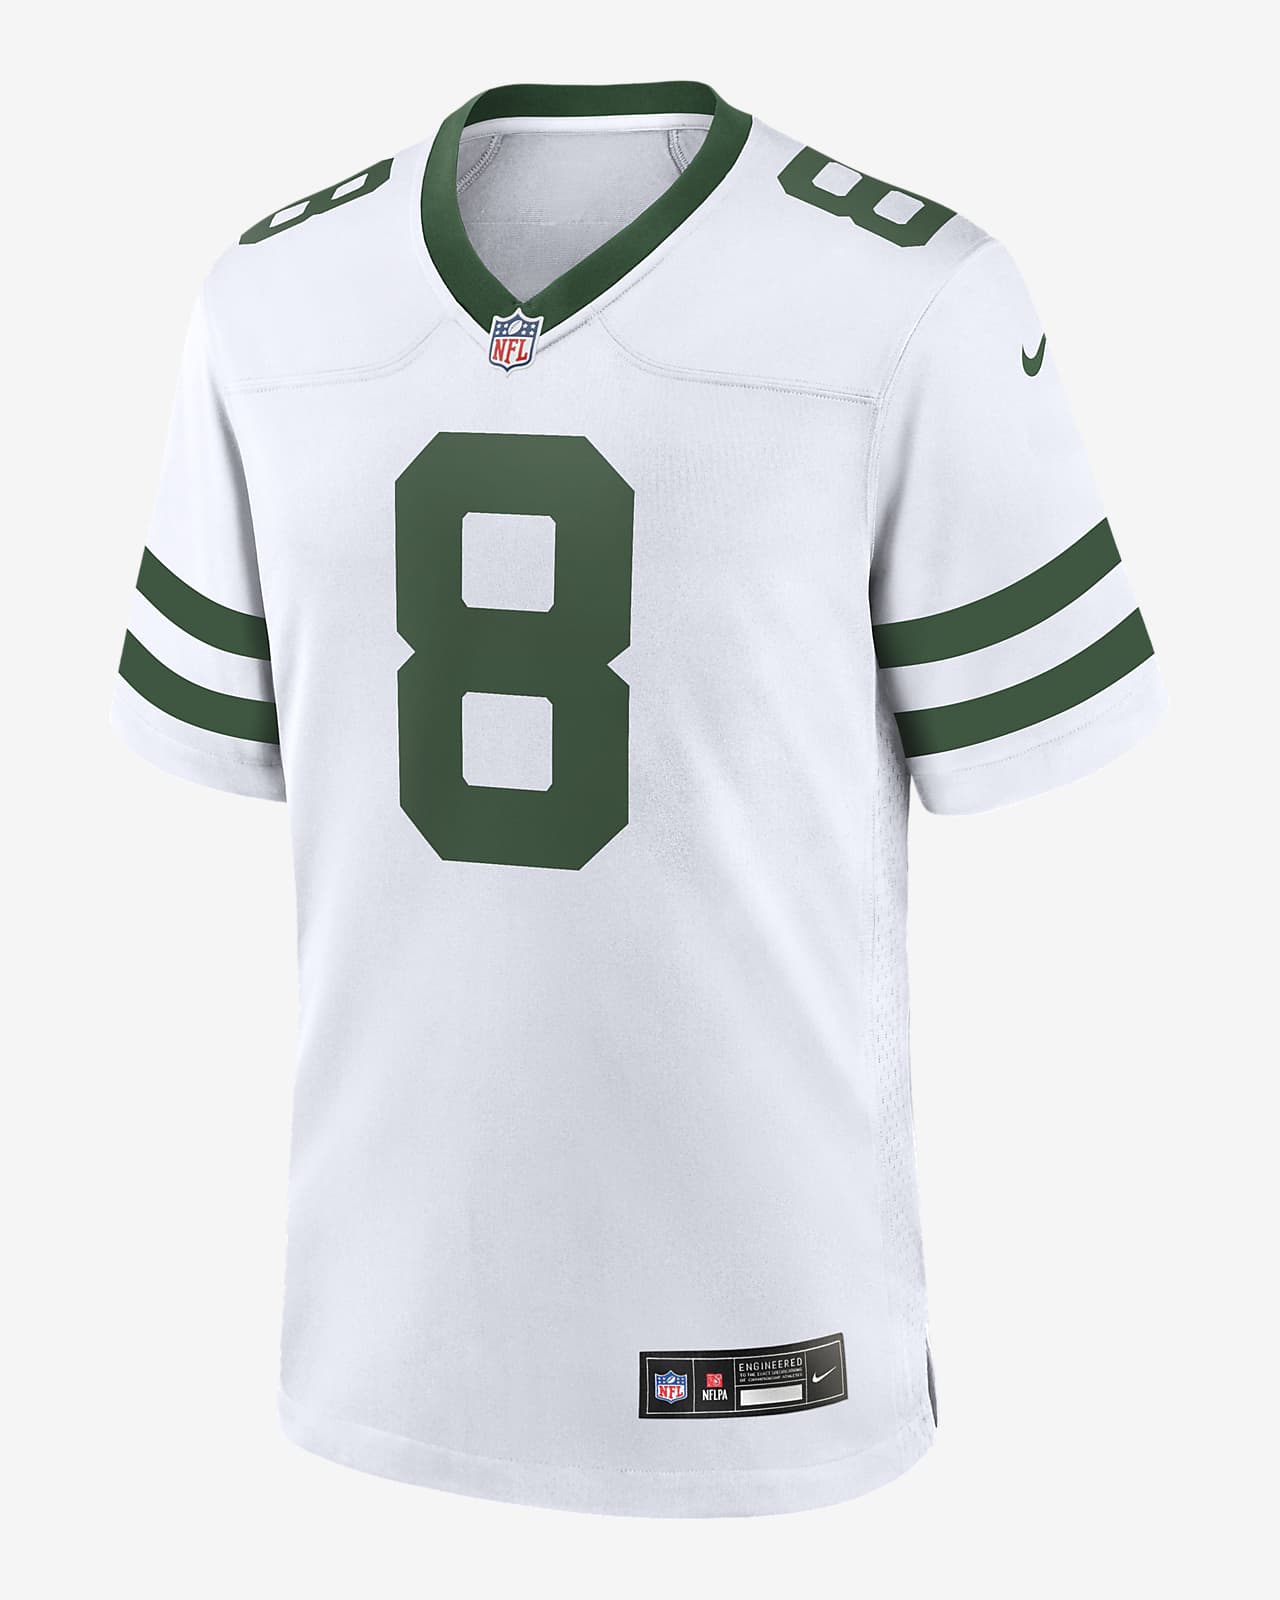 aaron rodgers jersey on sale